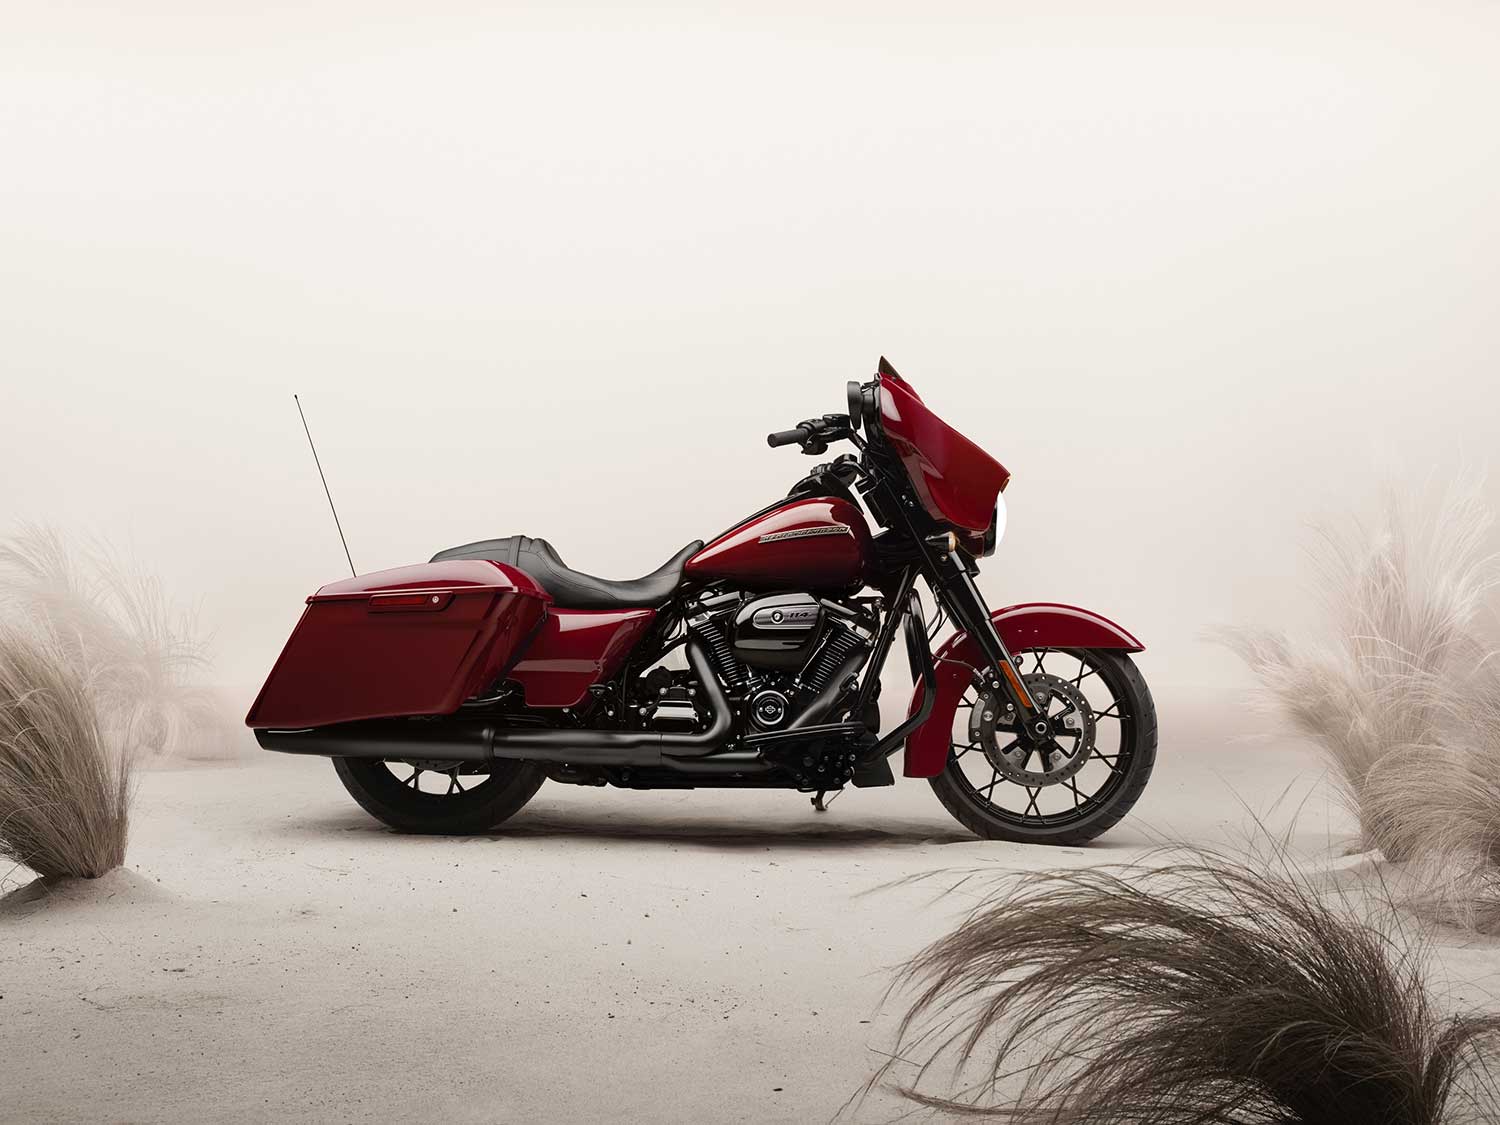 The 2020 Street Glide Special packs a Milwaukee-Eight 114 engine, premium finishes and bigger Boom! Box GTS system, and is priced at ,699.